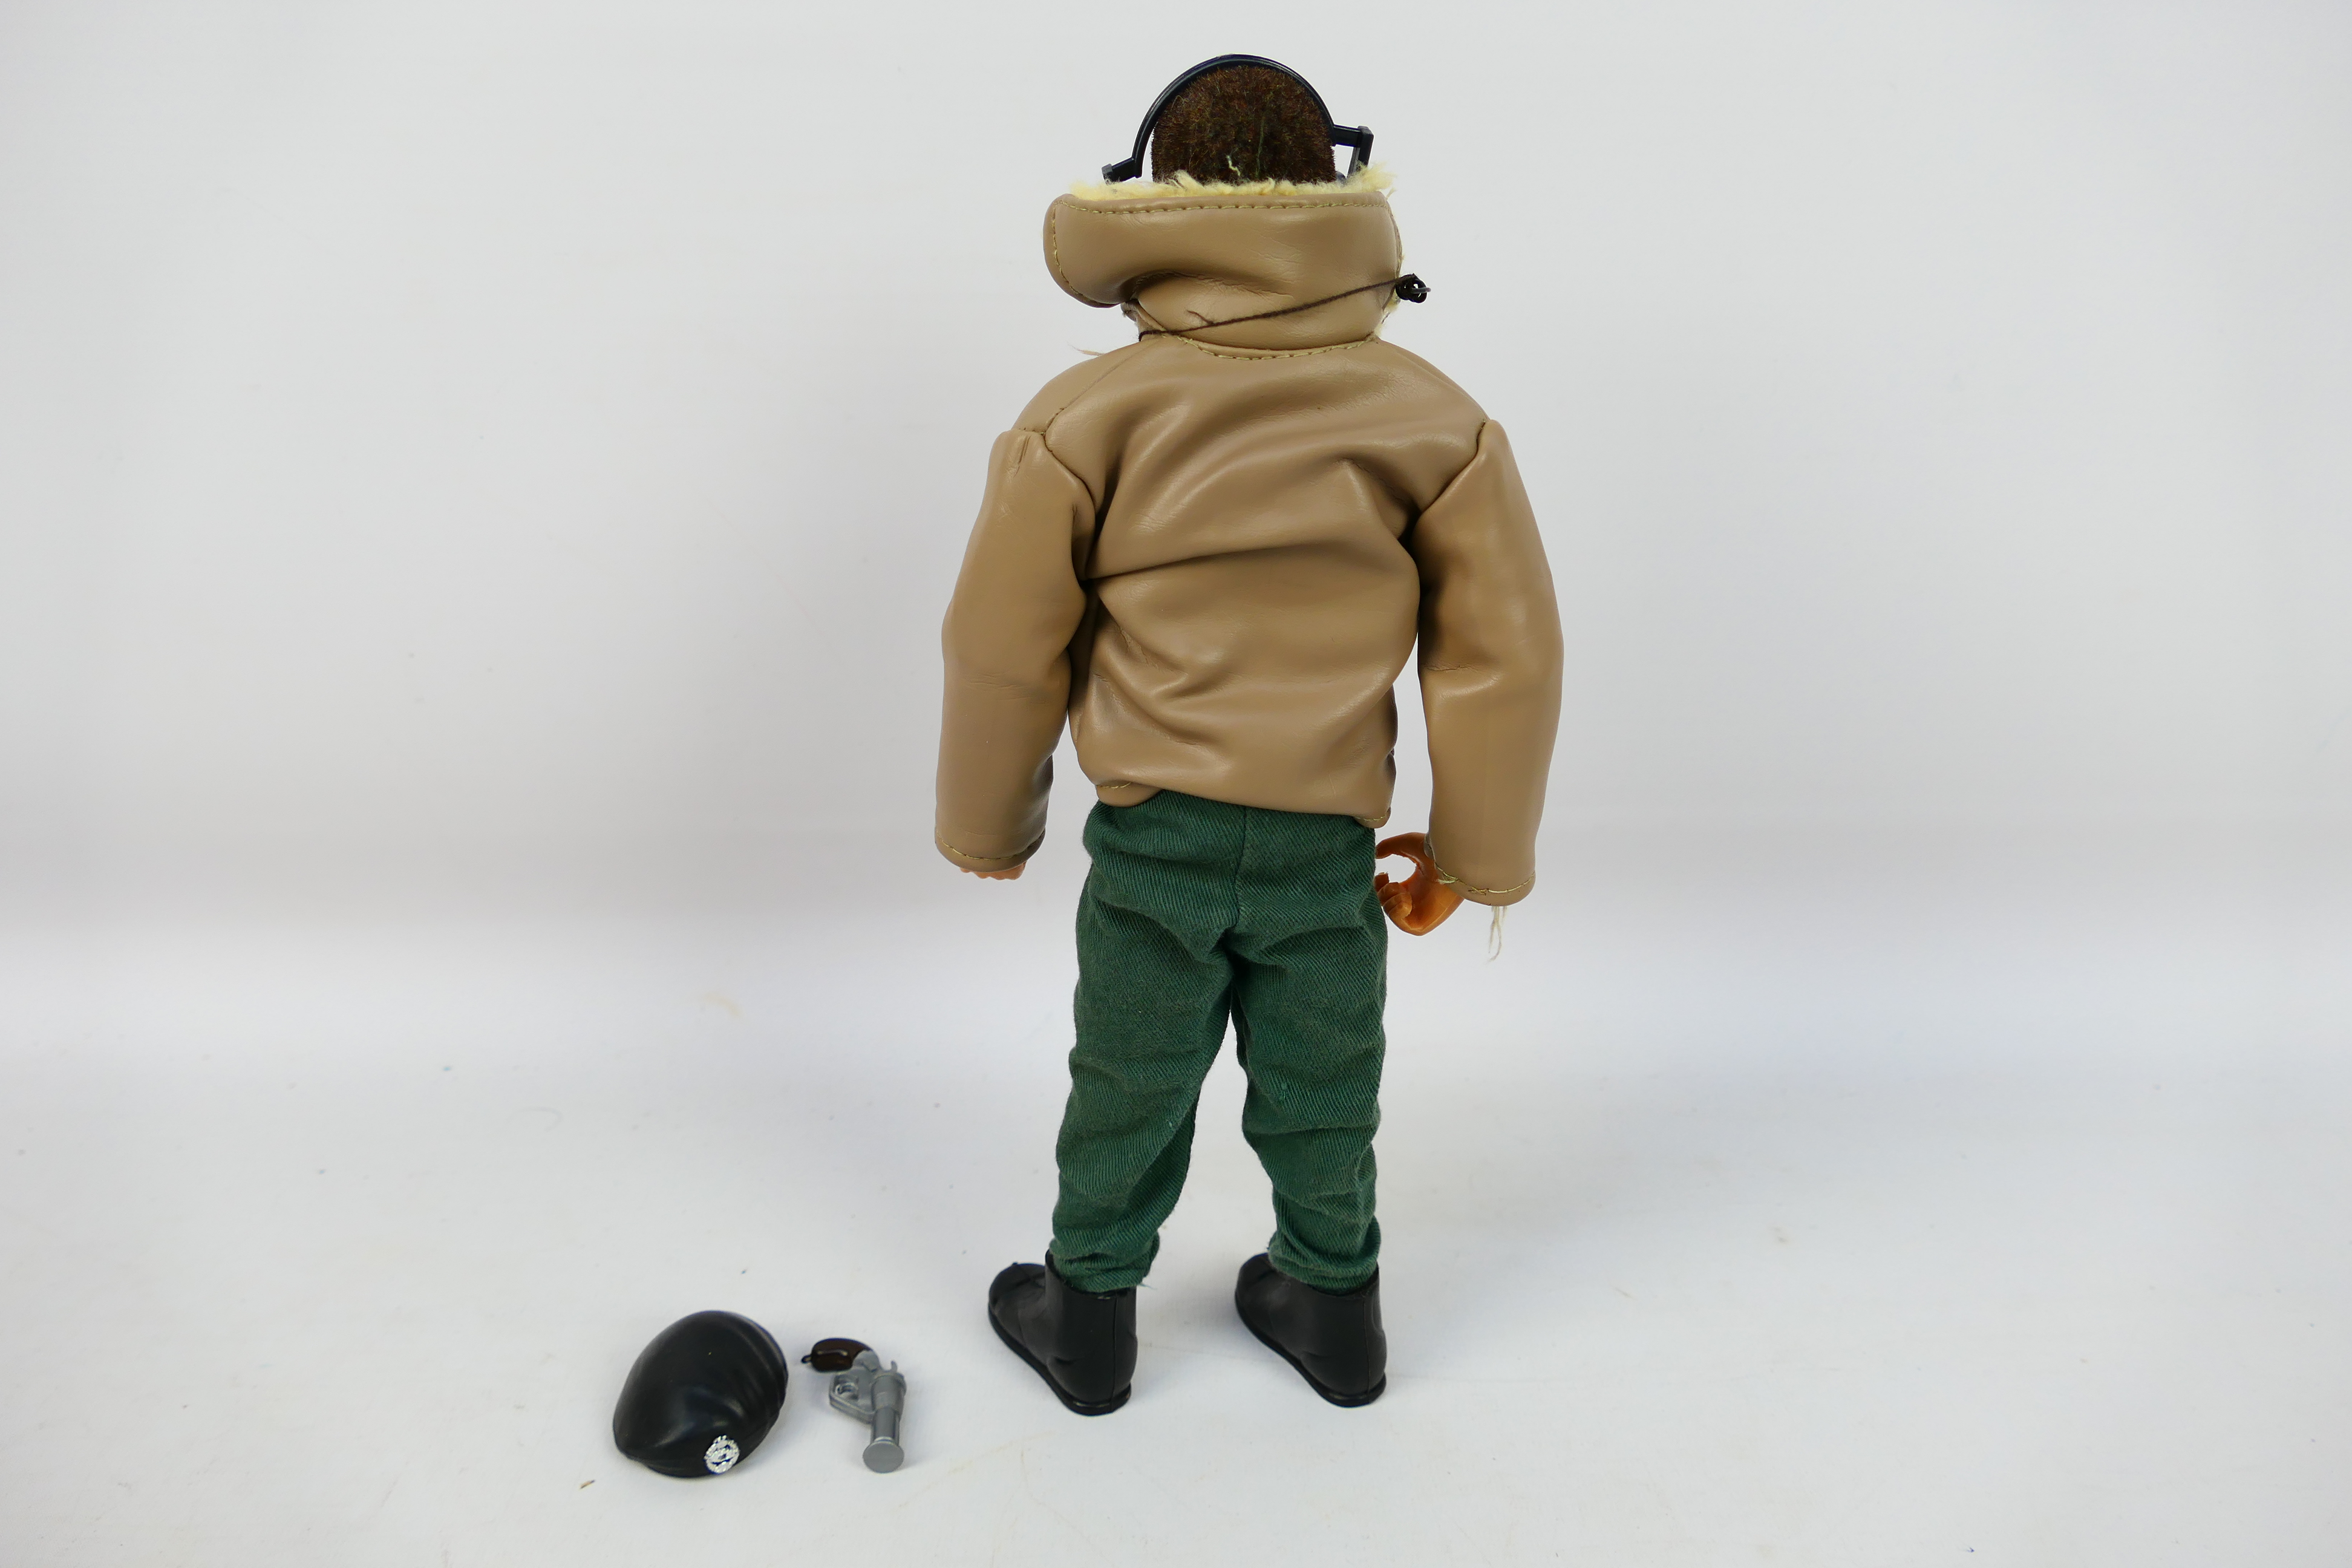 Palitoy - Action Man - A 1978 Action Man action figure with Flock hair and eagle eyes in a Tank - Image 4 of 8